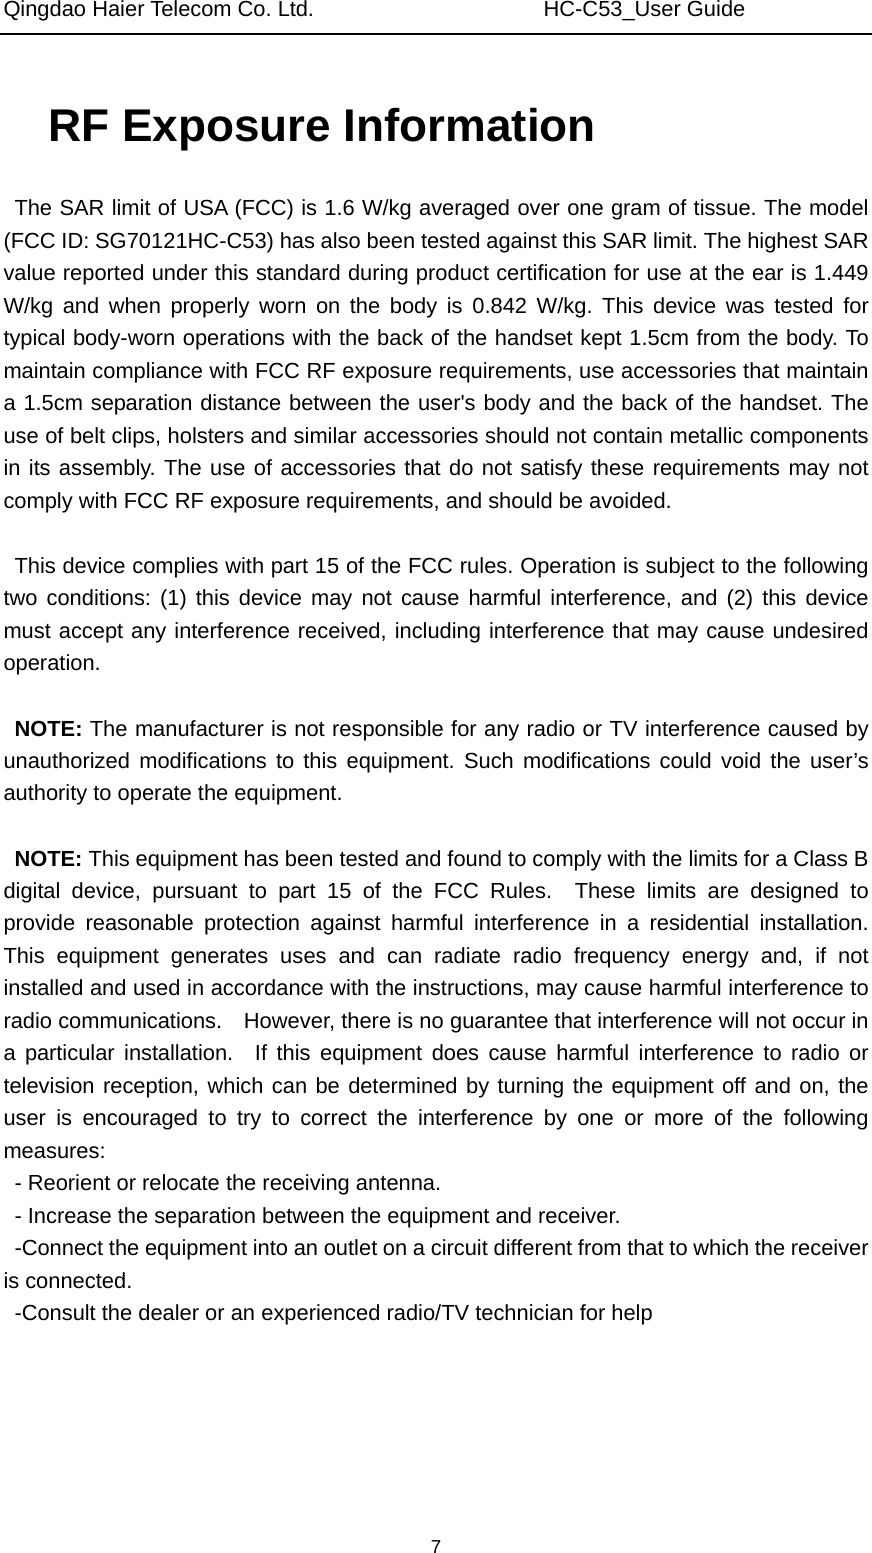 Qingdao Haier Telecom Co. Ltd.                     HC-C53_User Guide  7RF Exposure Information   The SAR limit of USA (FCC) is 1.6 W/kg averaged over one gram of tissue. The model (FCC ID: SG70121HC-C53) has also been tested against this SAR limit. The highest SAR value reported under this standard during product certification for use at the ear is 1.449 W/kg and when properly worn on the body is 0.842 W/kg. This device was tested for typical body-worn operations with the back of the handset kept 1.5cm from the body. To maintain compliance with FCC RF exposure requirements, use accessories that maintain a 1.5cm separation distance between the user&apos;s body and the back of the handset. The use of belt clips, holsters and similar accessories should not contain metallic components in its assembly. The use of accessories that do not satisfy these requirements may not comply with FCC RF exposure requirements, and should be avoided.  This device complies with part 15 of the FCC rules. Operation is subject to the following two conditions: (1) this device may not cause harmful interference, and (2) this device must accept any interference received, including interference that may cause undesired operation.  NOTE: The manufacturer is not responsible for any radio or TV interference caused by unauthorized modifications to this equipment. Such modifications could void the user’s authority to operate the equipment.  NOTE: This equipment has been tested and found to comply with the limits for a Class B digital device, pursuant to part 15 of the FCC Rules.  These limits are designed to provide reasonable protection against harmful interference in a residential installation.  This equipment generates uses and can radiate radio frequency energy and, if not installed and used in accordance with the instructions, may cause harmful interference to radio communications.    However, there is no guarantee that interference will not occur in a particular installation.  If this equipment does cause harmful interference to radio or television reception, which can be determined by turning the equipment off and on, the user is encouraged to try to correct the interference by one or more of the following measures: - Reorient or relocate the receiving antenna. - Increase the separation between the equipment and receiver. -Connect the equipment into an outlet on a circuit different from that to which the receiver is connected. -Consult the dealer or an experienced radio/TV technician for help  